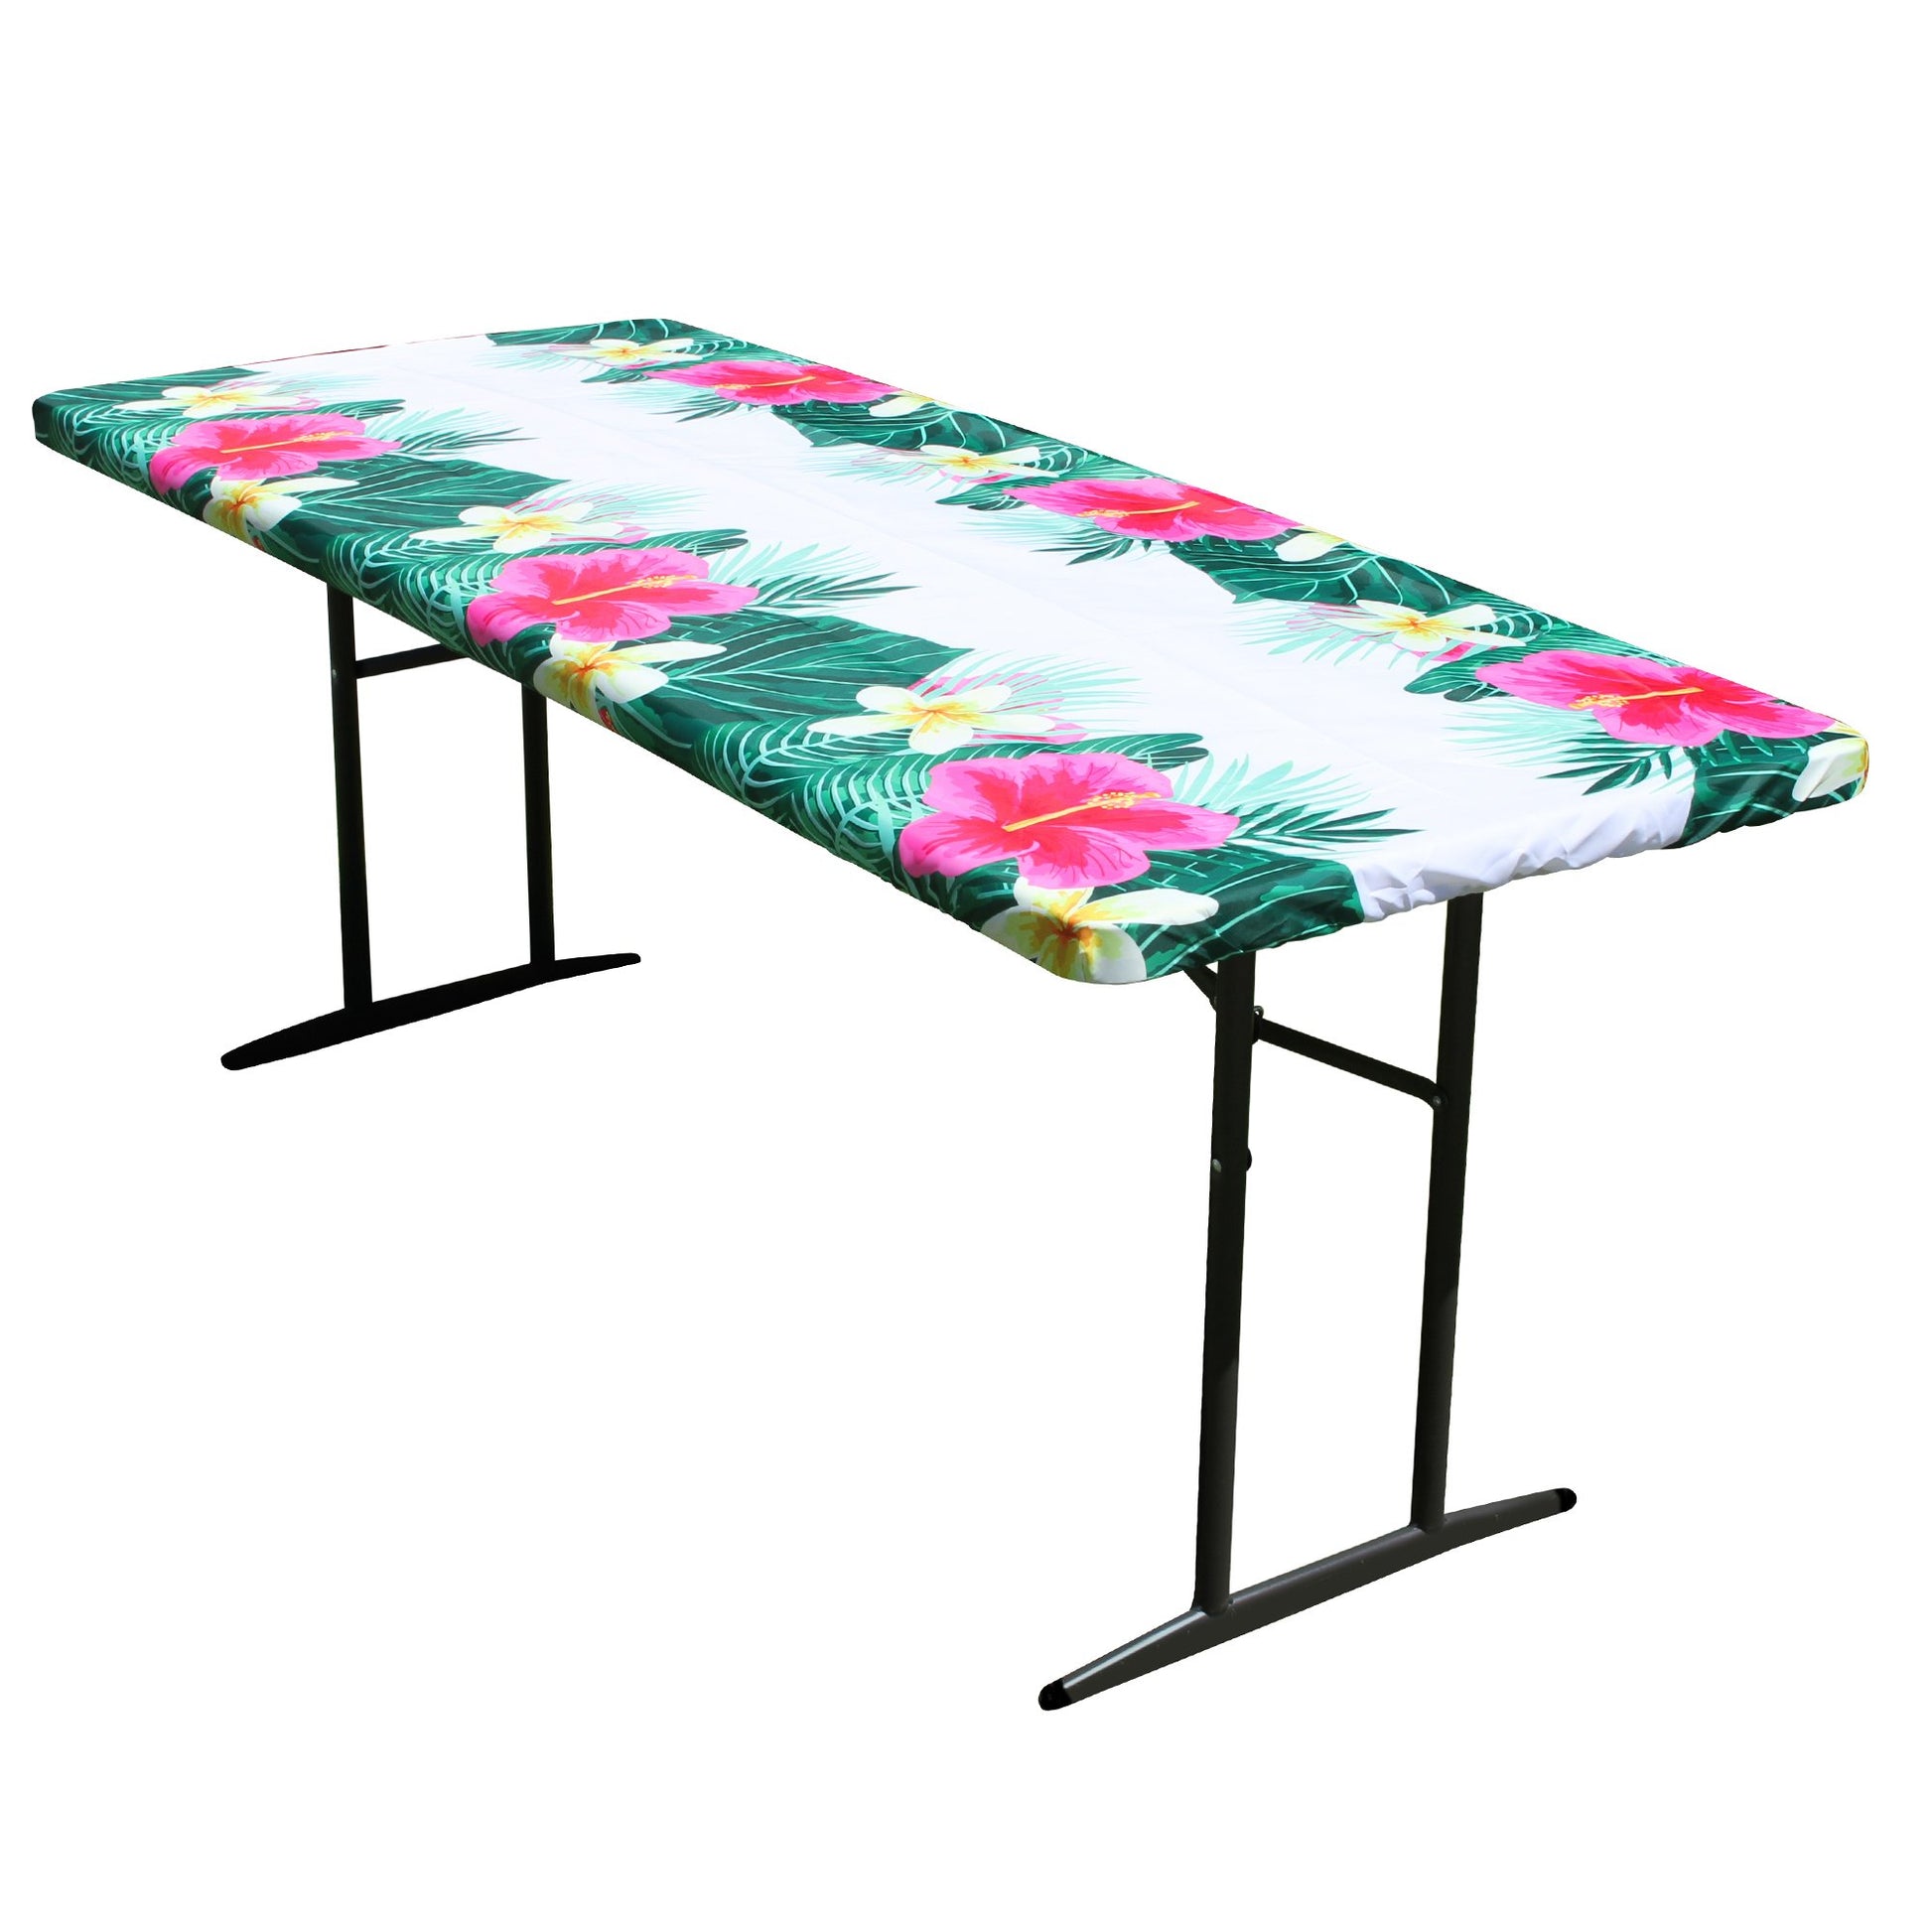 TableCloth PLUS 72" Summer Fitted Polyester Tablecloth for 6' Folding Tables displayed adorning a folding table